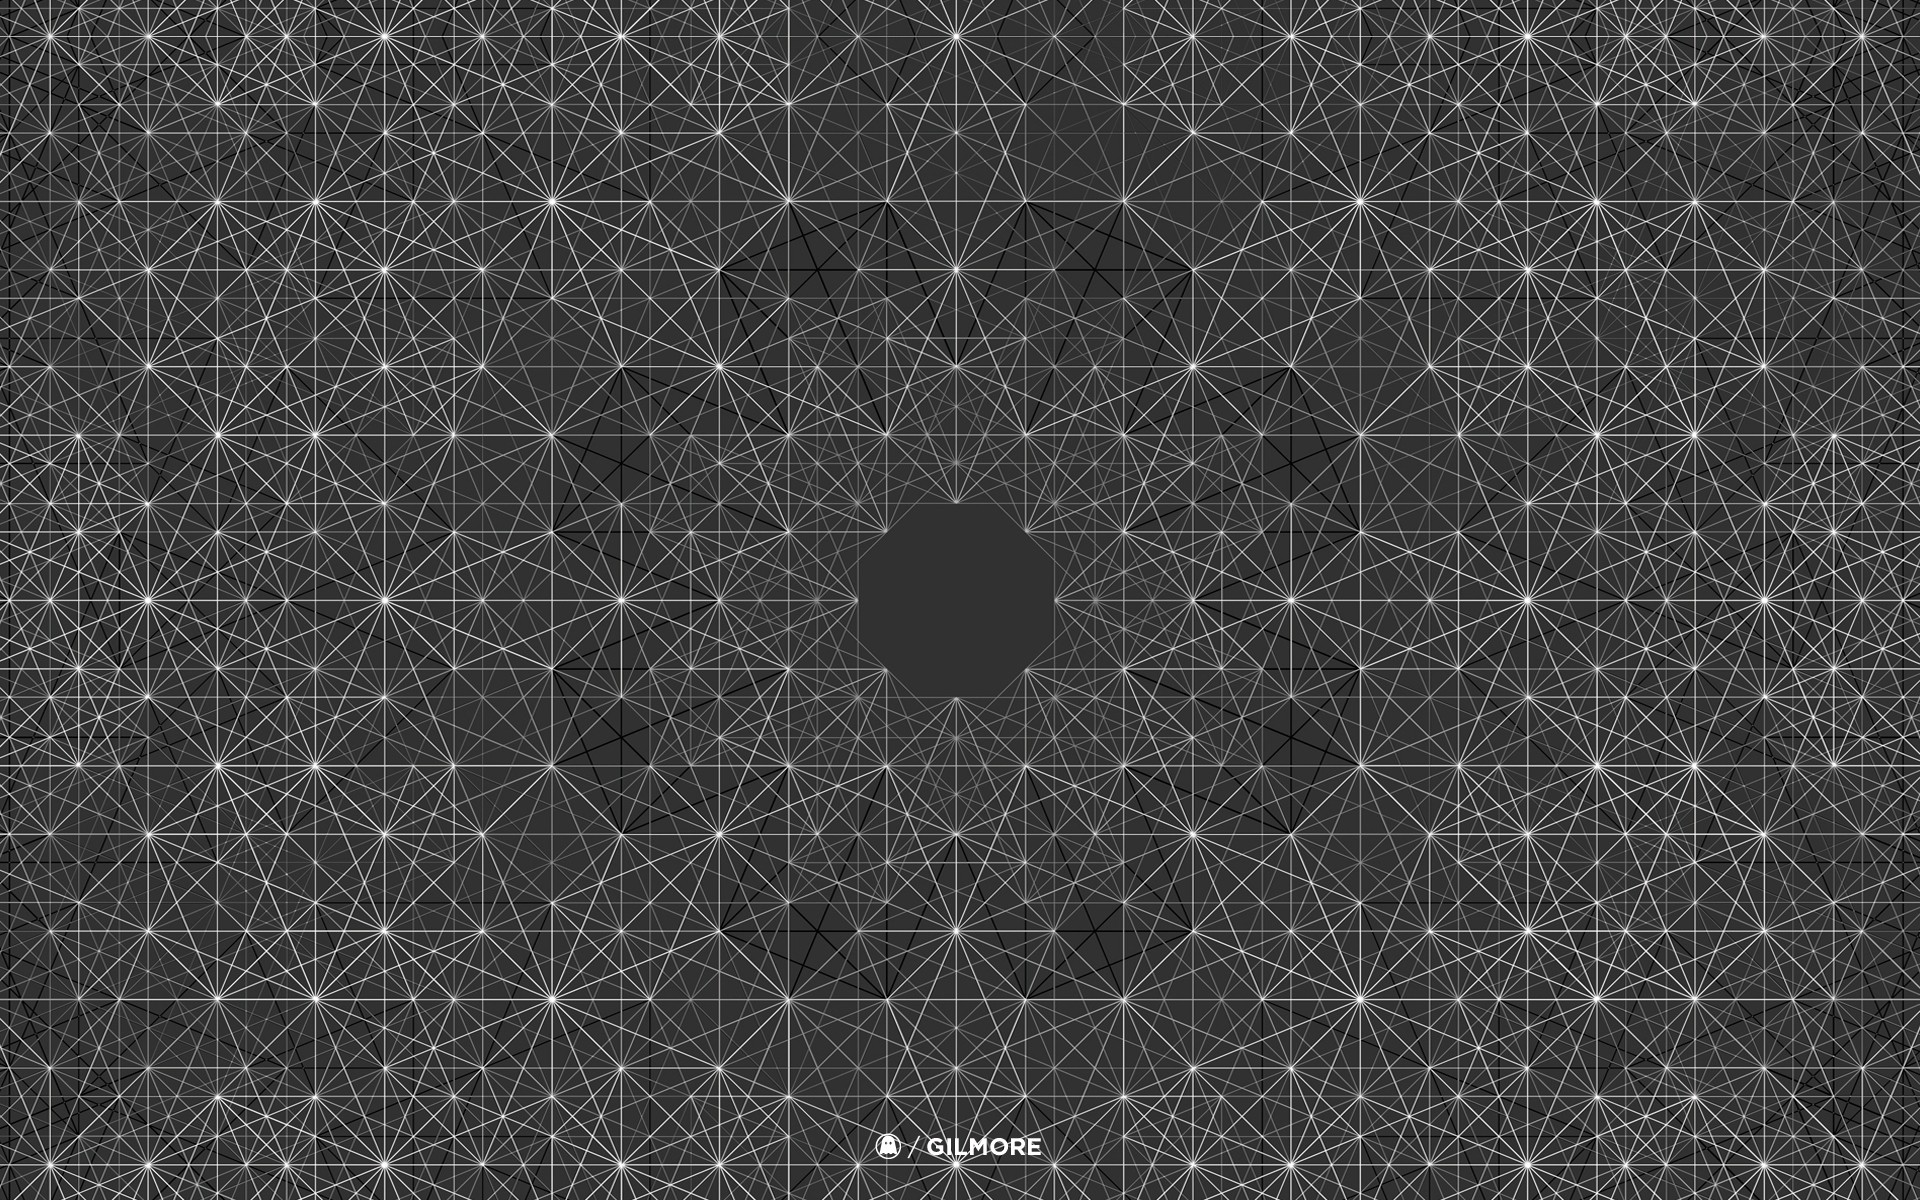 General 1920x1200 Andy Gilmore symmetry abstract monochrome geometry pattern